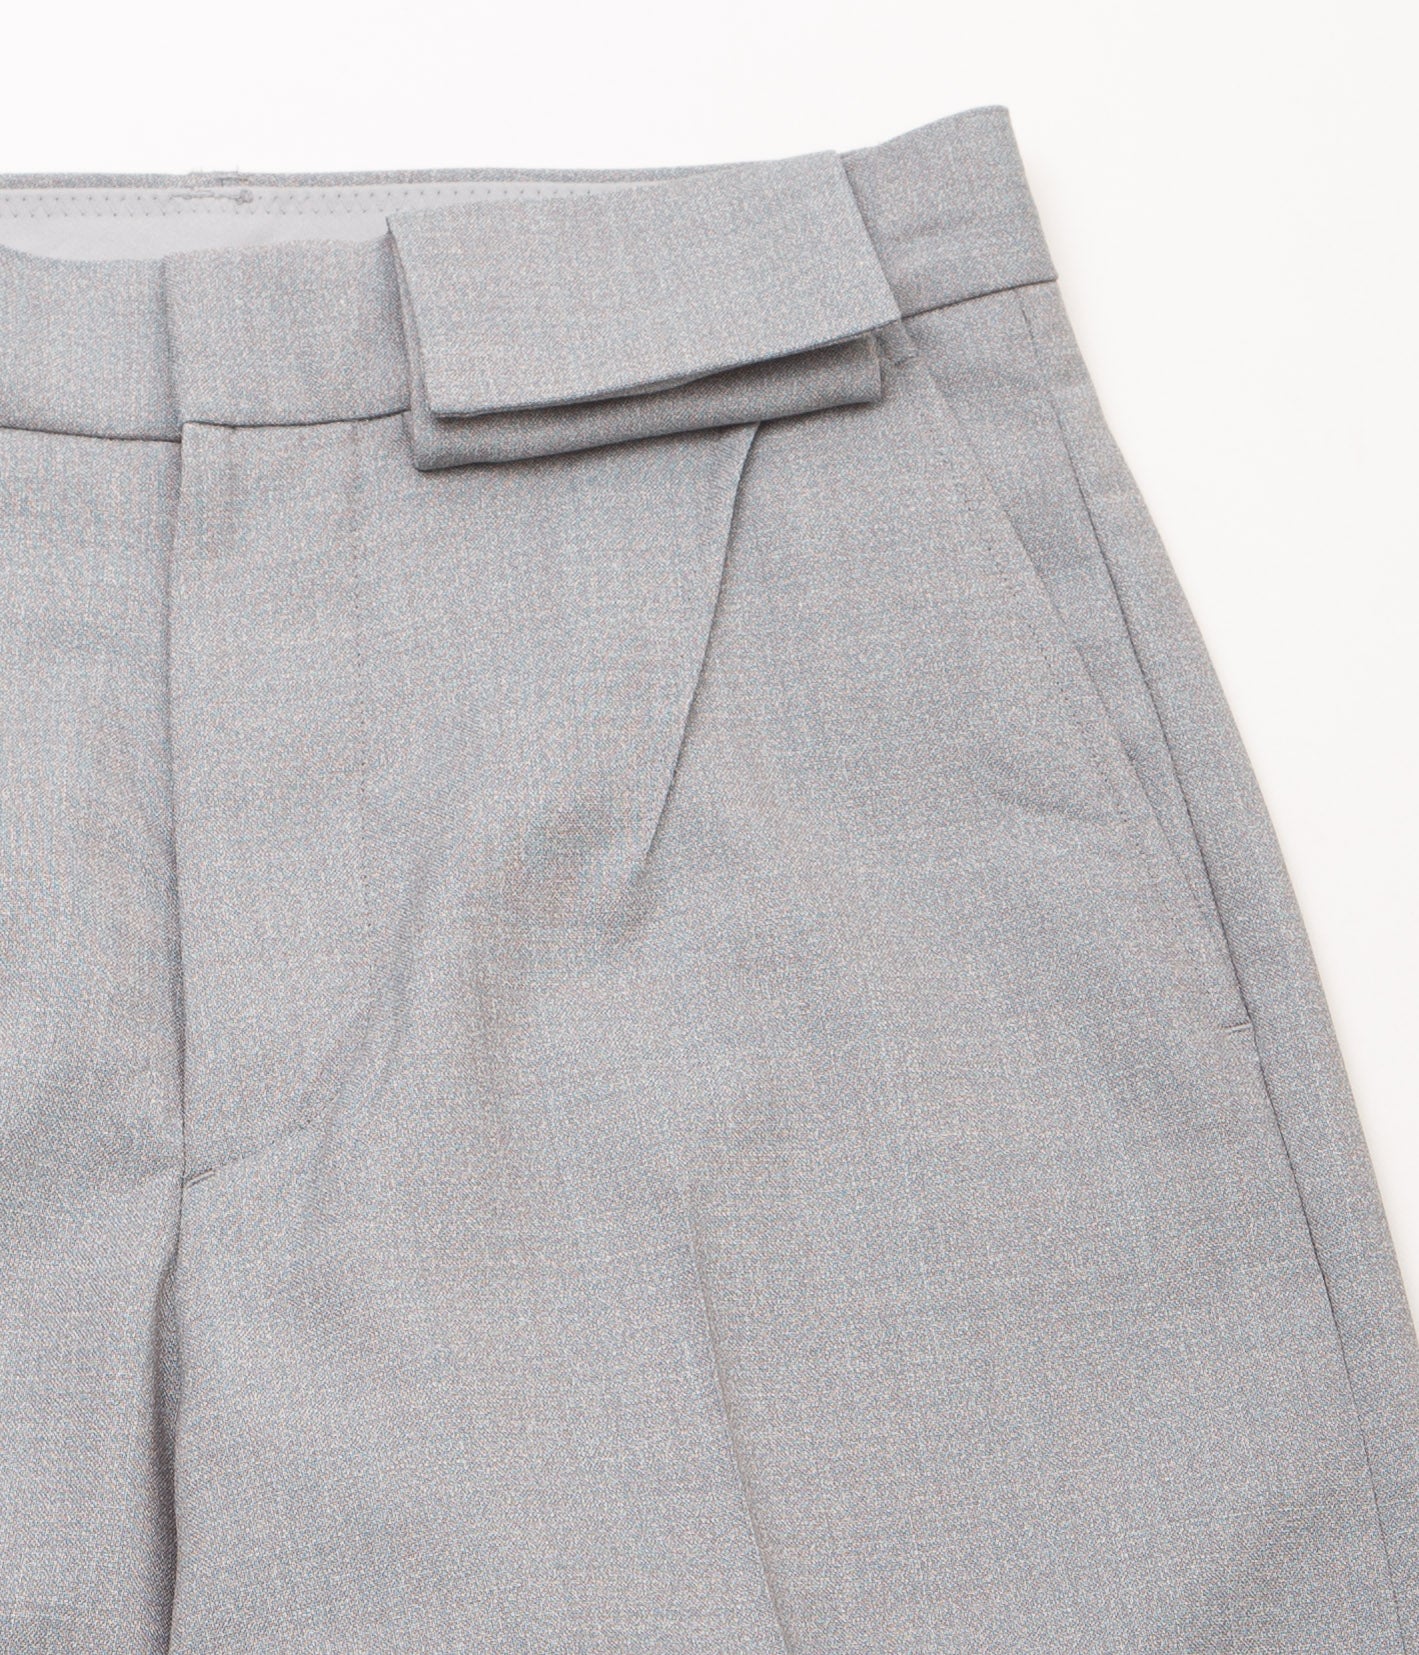 PHOTOCOPIEU "TROUSERS WITH CARD CASE"(GRAY)